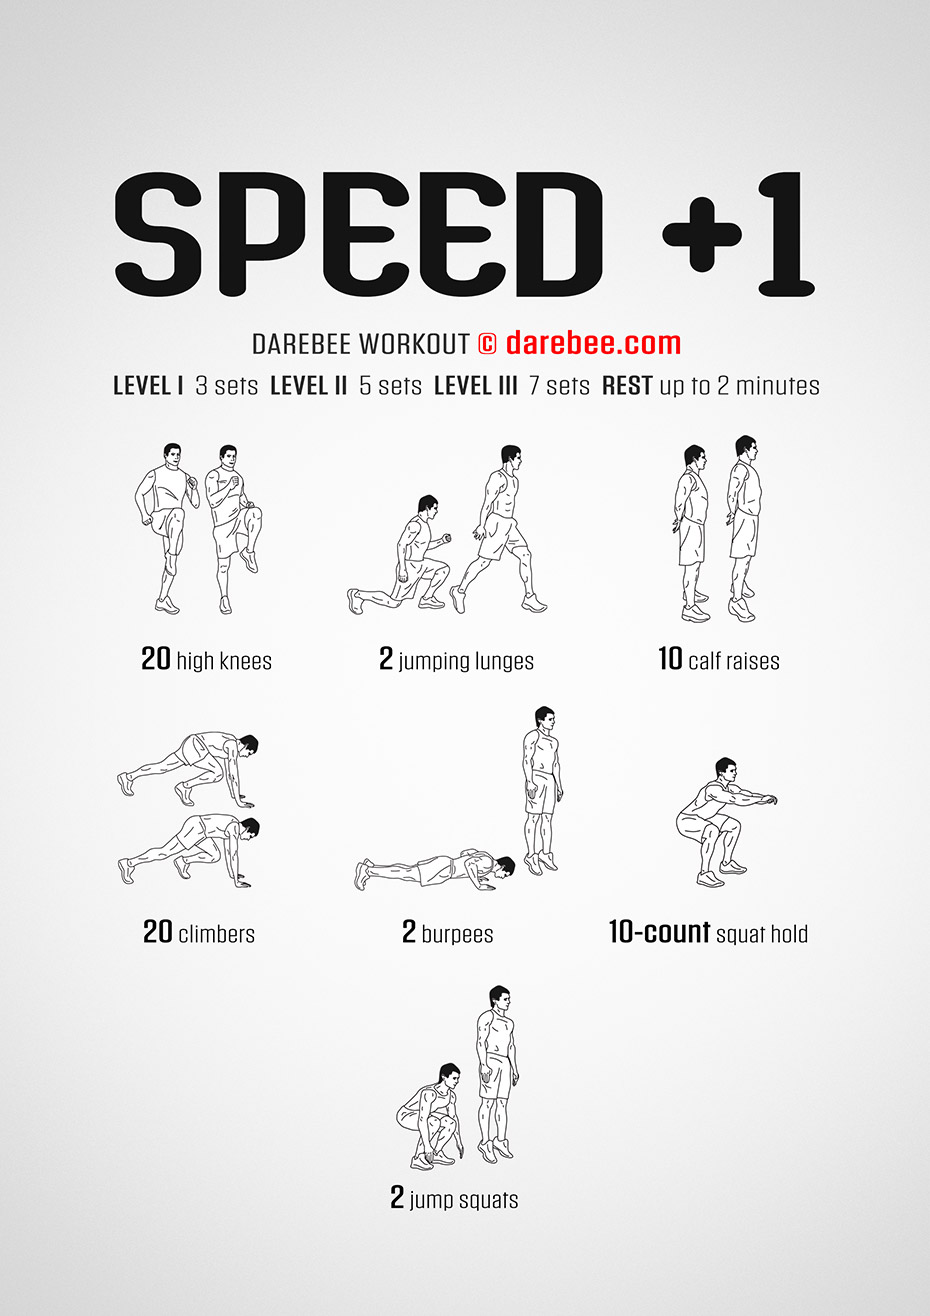 Exercises To Improve Speed | peacecommission.kdsg.gov.ng